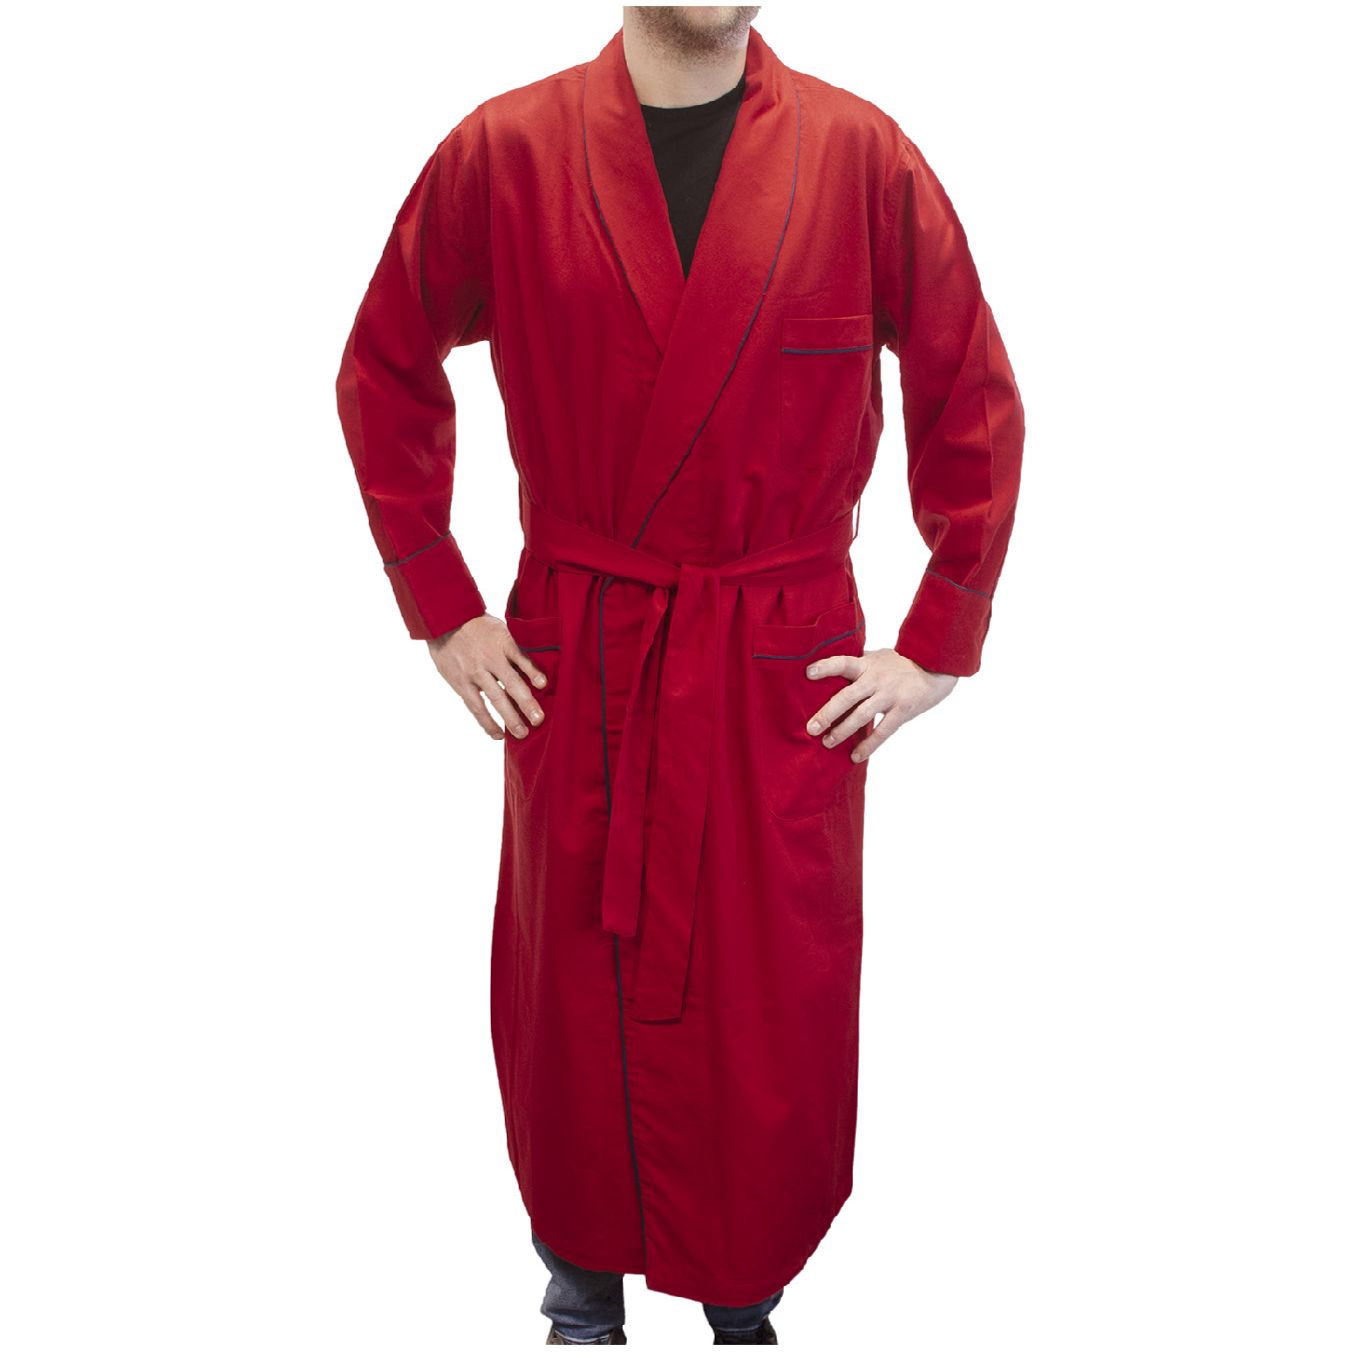 Gentleman's Cotton and Wool Blend Robe in Solid Red with Navy Piping by Viyella